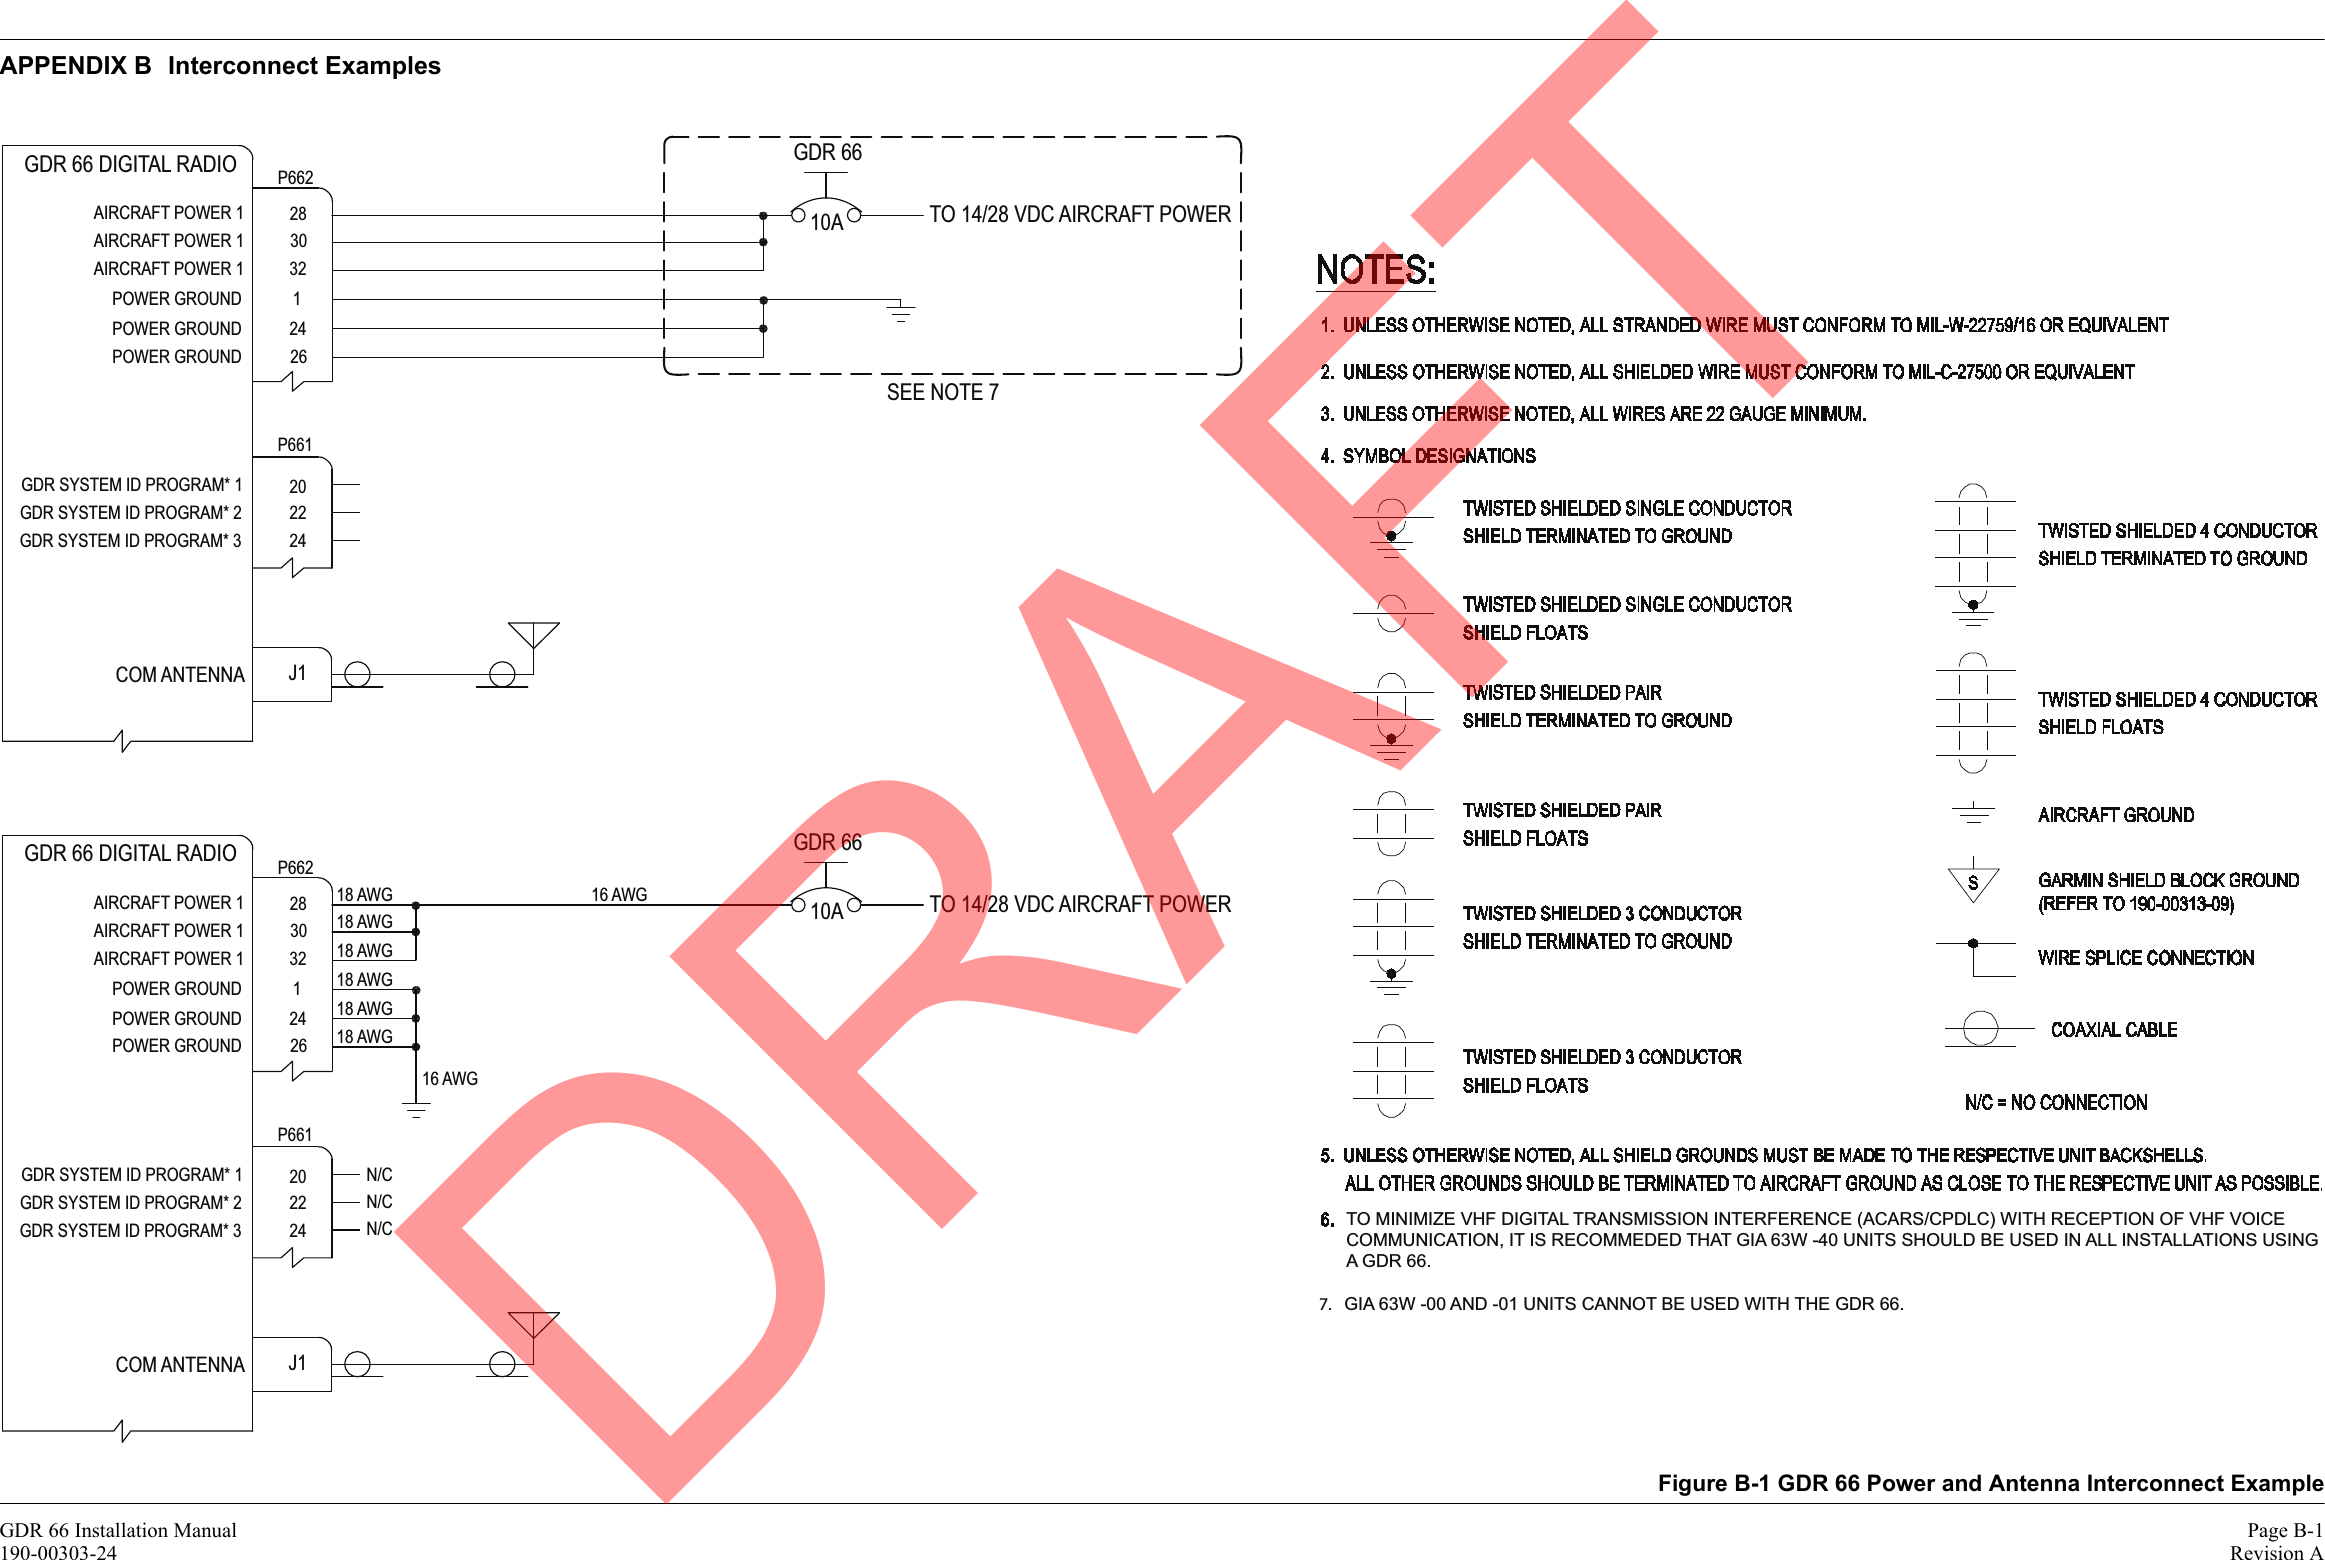 GDR 66 Installation Manual Page B-1190-00303-24 Revision AAPPENDIX B Interconnect ExamplesFigure B-1 GDR 66 Power and Antenna Interconnect Example7.   GIA 63W -00 AND -01 UNITS CANNOT BE USED WITH THE GDR 66.TO MINIMIZE VHF DIGITAL TRANSMISSION INTERFERENCE (ACARS/CPDLC) WITH RECEPTION OF VHF VOICE COMMUNICATION, IT IS RECOMMEDED THAT GIA 63W -40 UNITS SHOULD BE USED IN ALL INSTALLATIONS USINGA GDR 66.2830321GDR 66 DIGITAL RADIO GDR 6610AP662AIRCRAFT POWER 1 TO 14/28 VDC AIRCRAFT POWER2426AIRCRAFT POWER 1AIRCRAFT POWER 1POWER GROUNDPOWER GROUNDPOWER GROUNDCOM ANTENNA J1SEE NOTE 7GDR SYSTEM ID PROGRAM* 1GDR SYSTEM ID PROGRAM* 2GDR SYSTEM ID PROGRAM* 3P6612422202830321GDR 66 DIGITAL RADIO GDR 6610AP662AIRCRAFT POWER 1 TO 14/28 VDC AIRCRAFT POWER2426AIRCRAFT POWER 1AIRCRAFT POWER 1POWER GROUNDPOWER GROUNDPOWER GROUNDCOM ANTENNA J1GDR SYSTEM ID PROGRAM* 1GDR SYSTEM ID PROGRAM* 2GDR SYSTEM ID PROGRAM* 3P661242220 N/CN/CN/C18 AWG18 AWG18 AWG18 AWG18 AWG18 AWG16 AWG16 AWGDRAFT